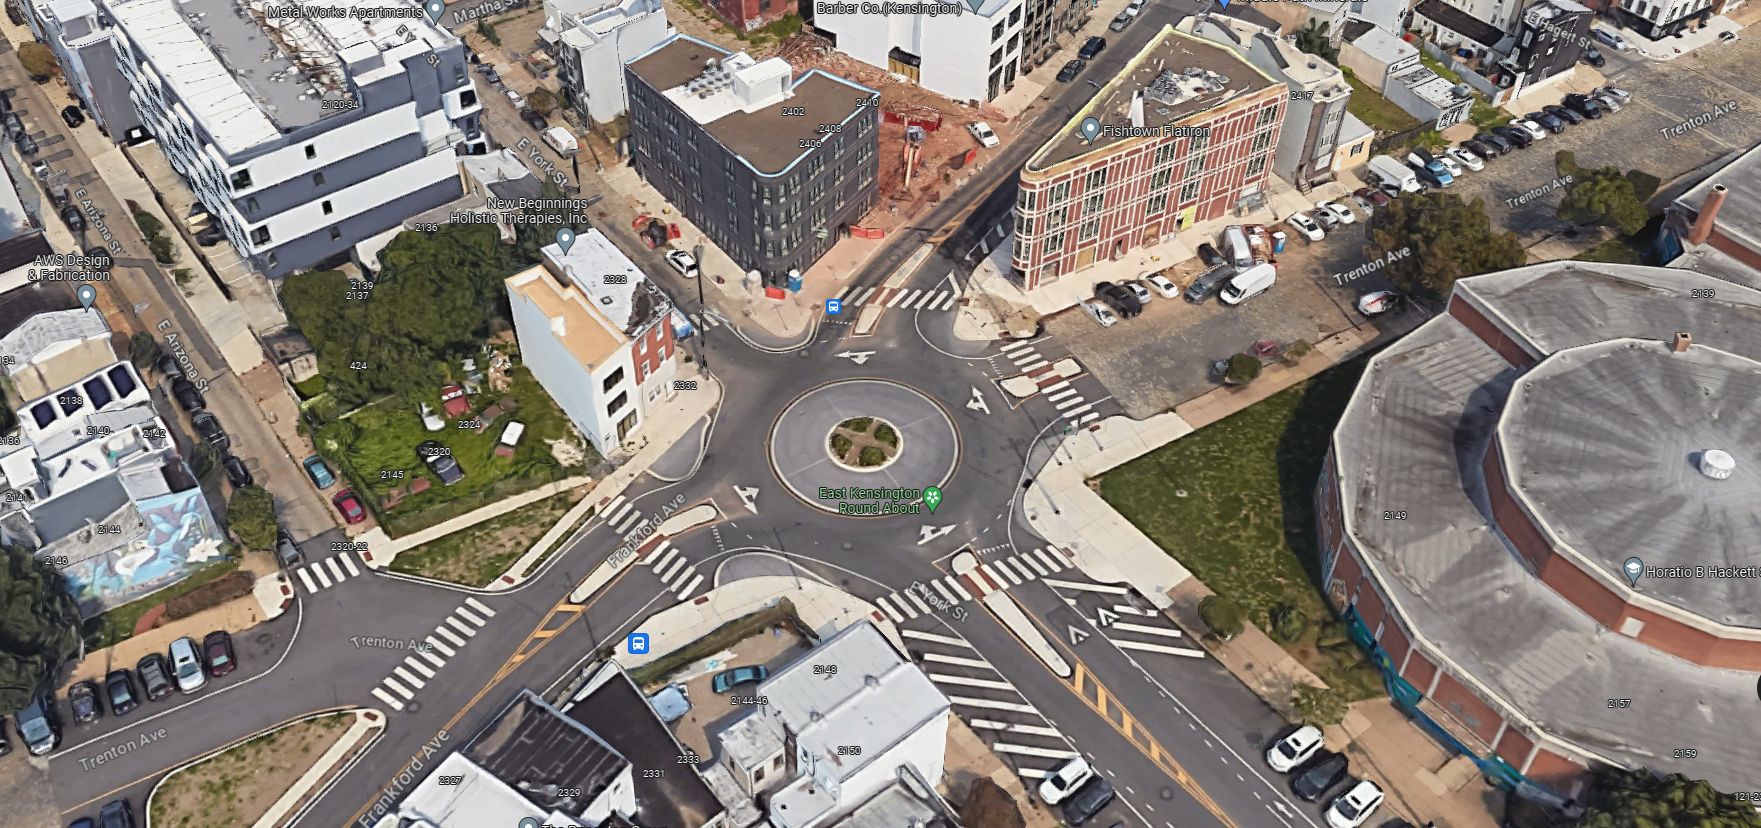 Fishtown Roundabout (aka East Kensington Roundabout). Aerial view. Looking north. Credit: Google Maps